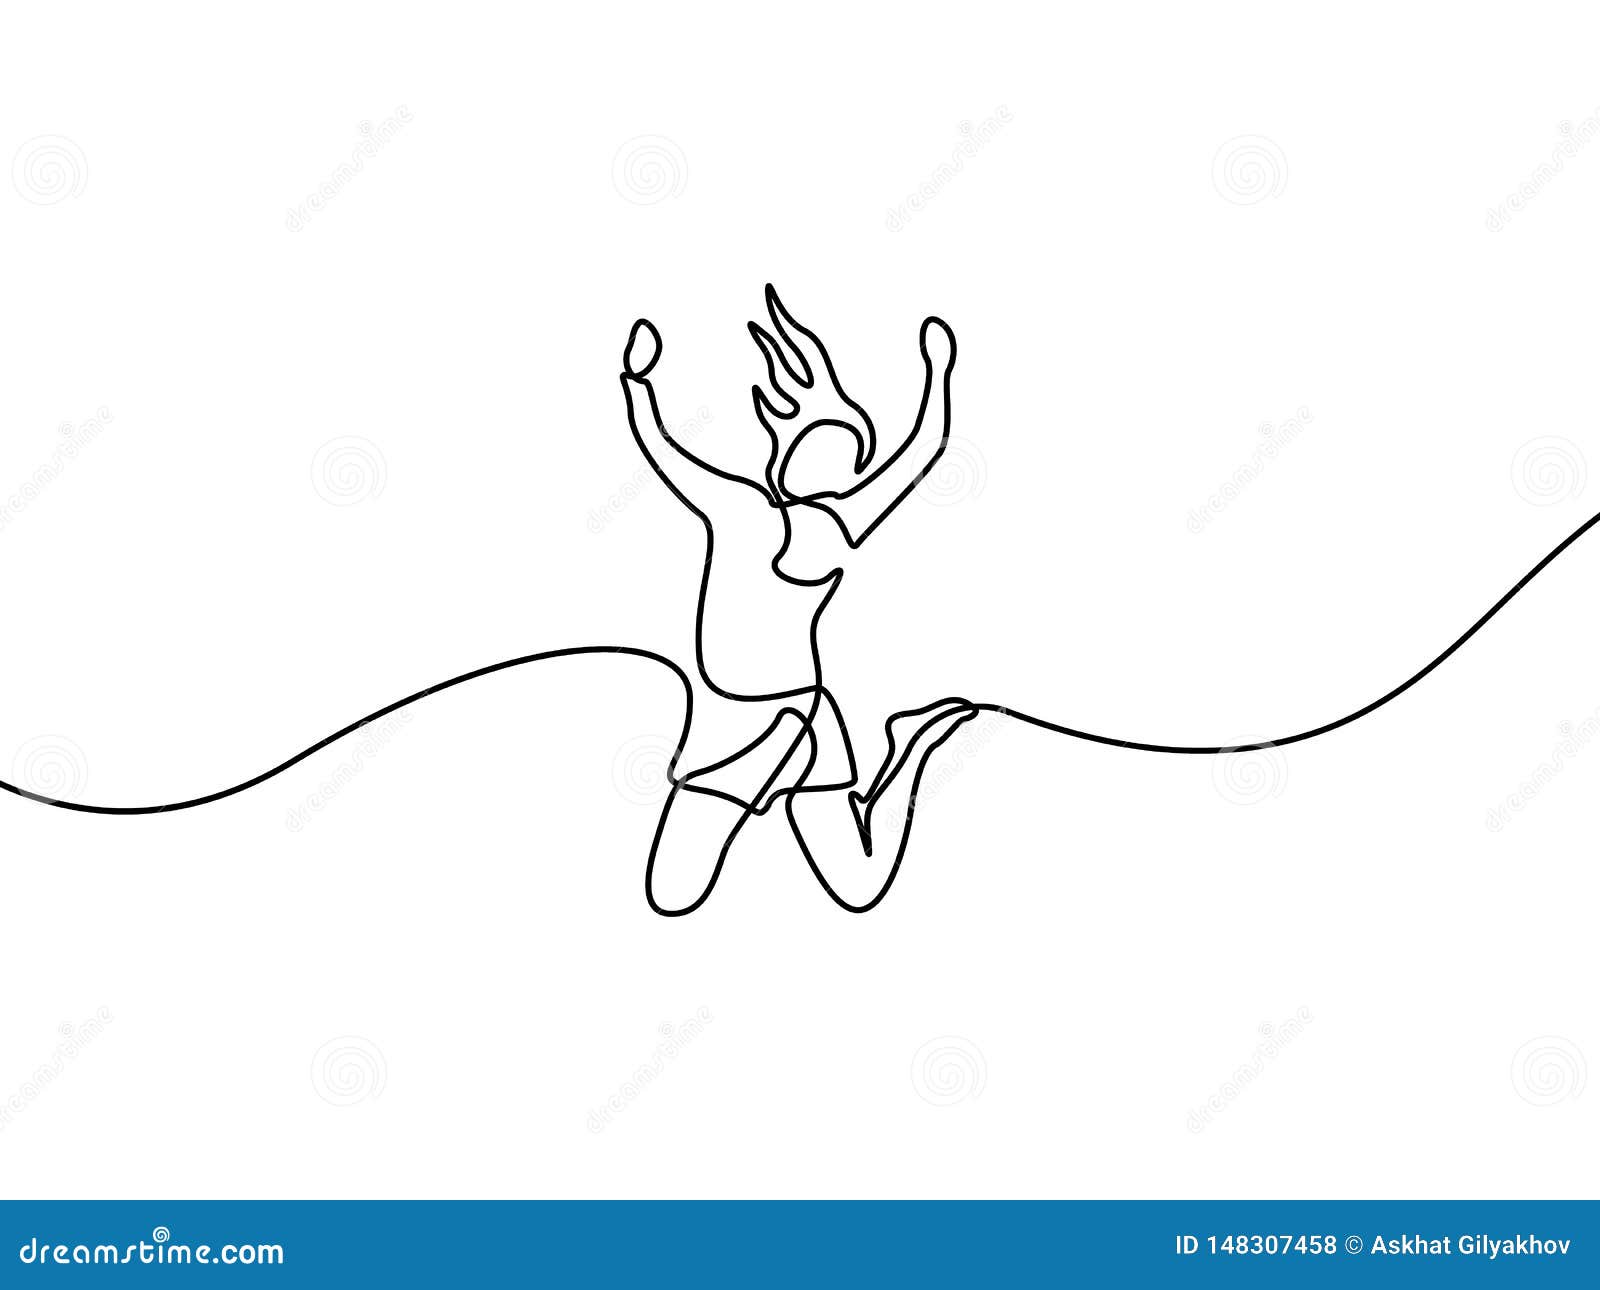 Continuous Line Drawing Woman Jumps for Happy. Vector Illustration ...